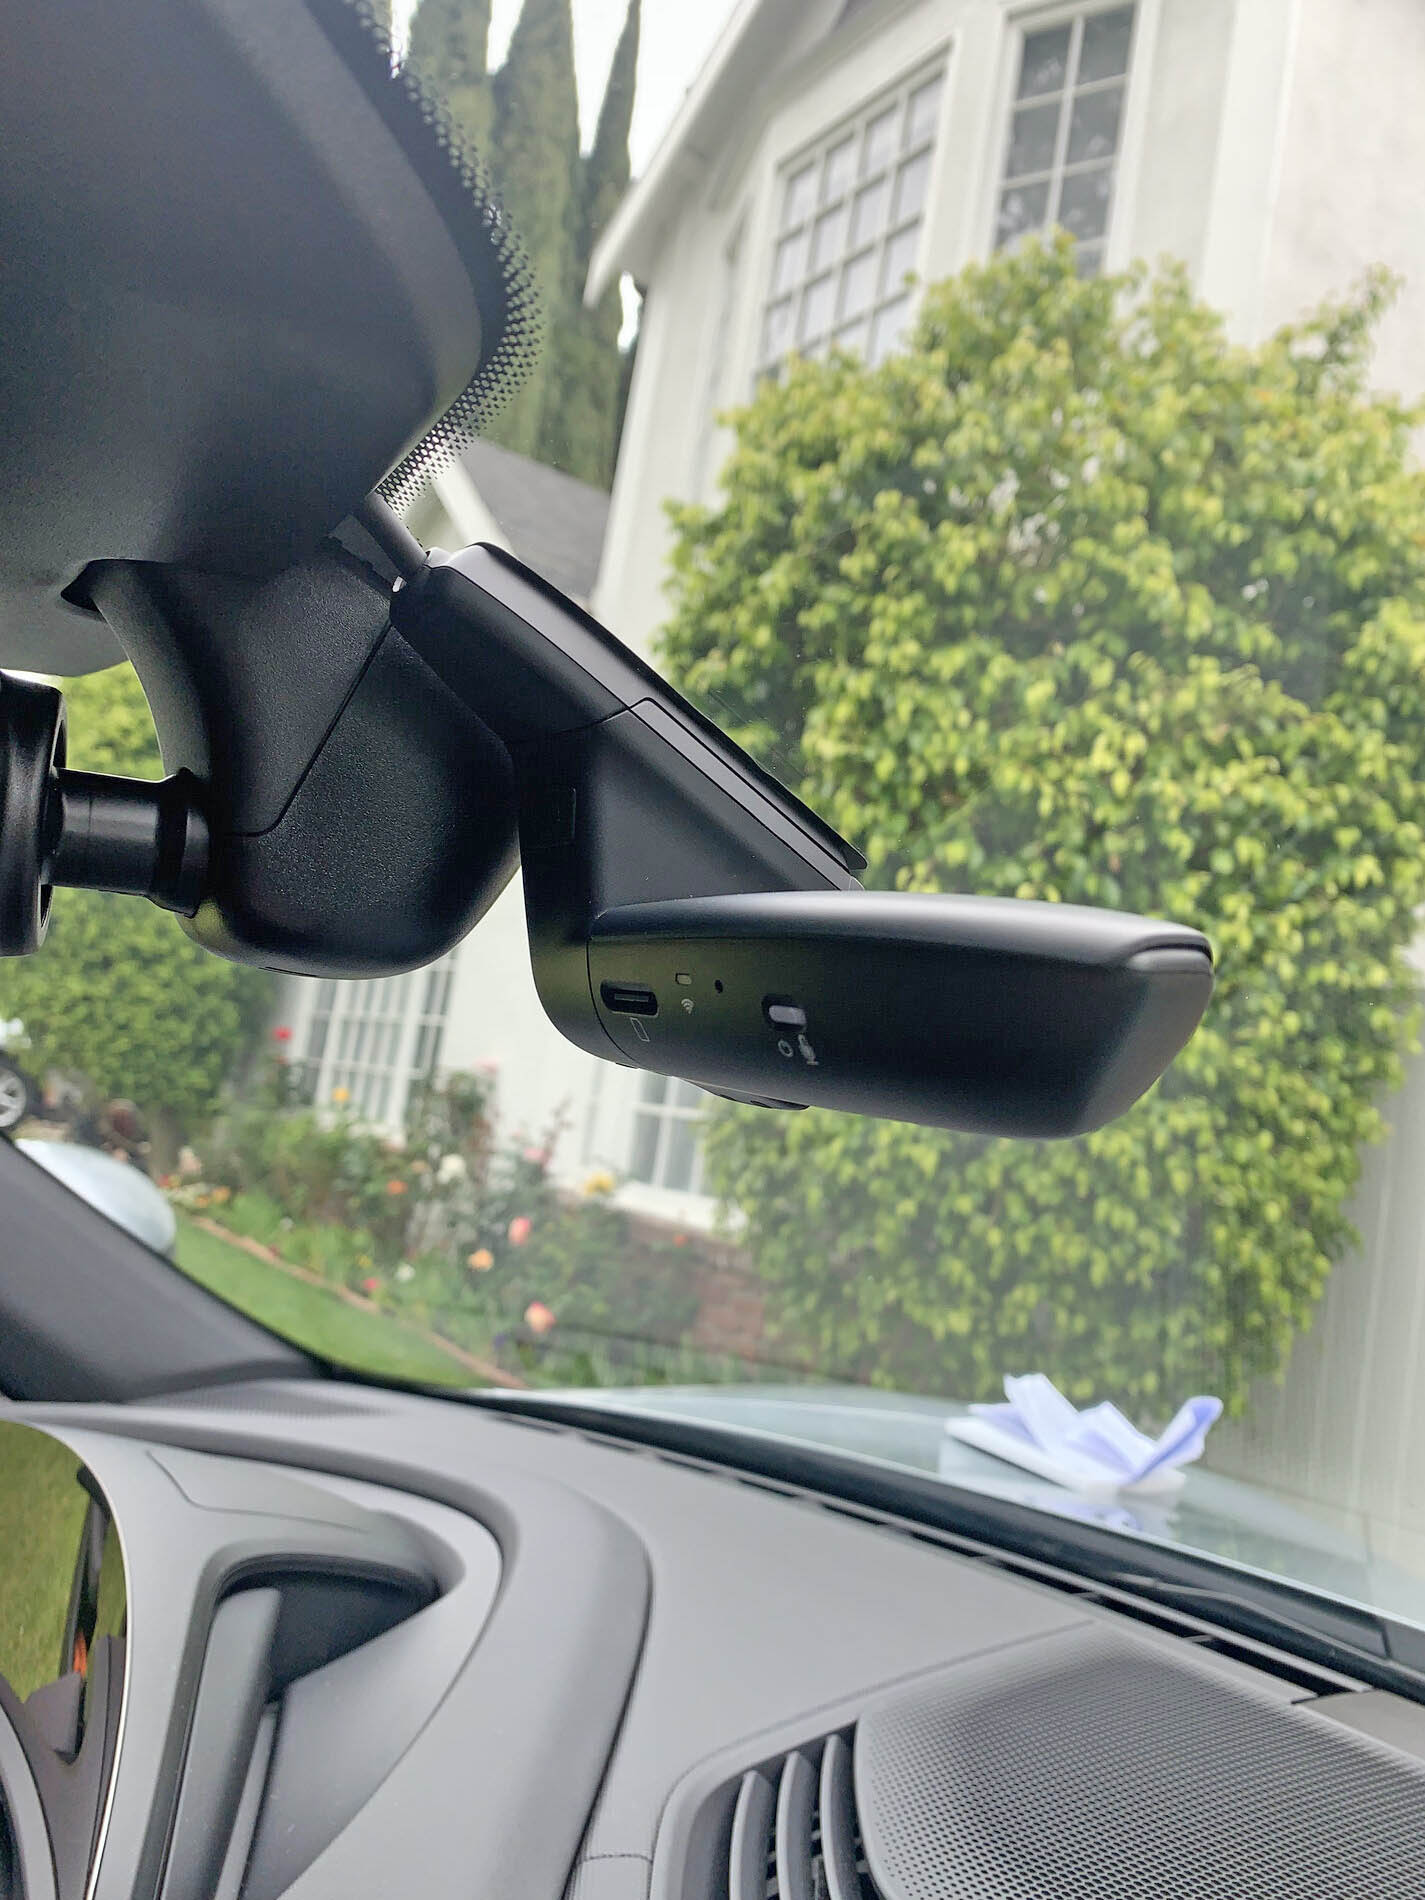 Porsche Taycan Porsche Dashcam Installed - Review and Overview for US Taycan Owners IMG_5848